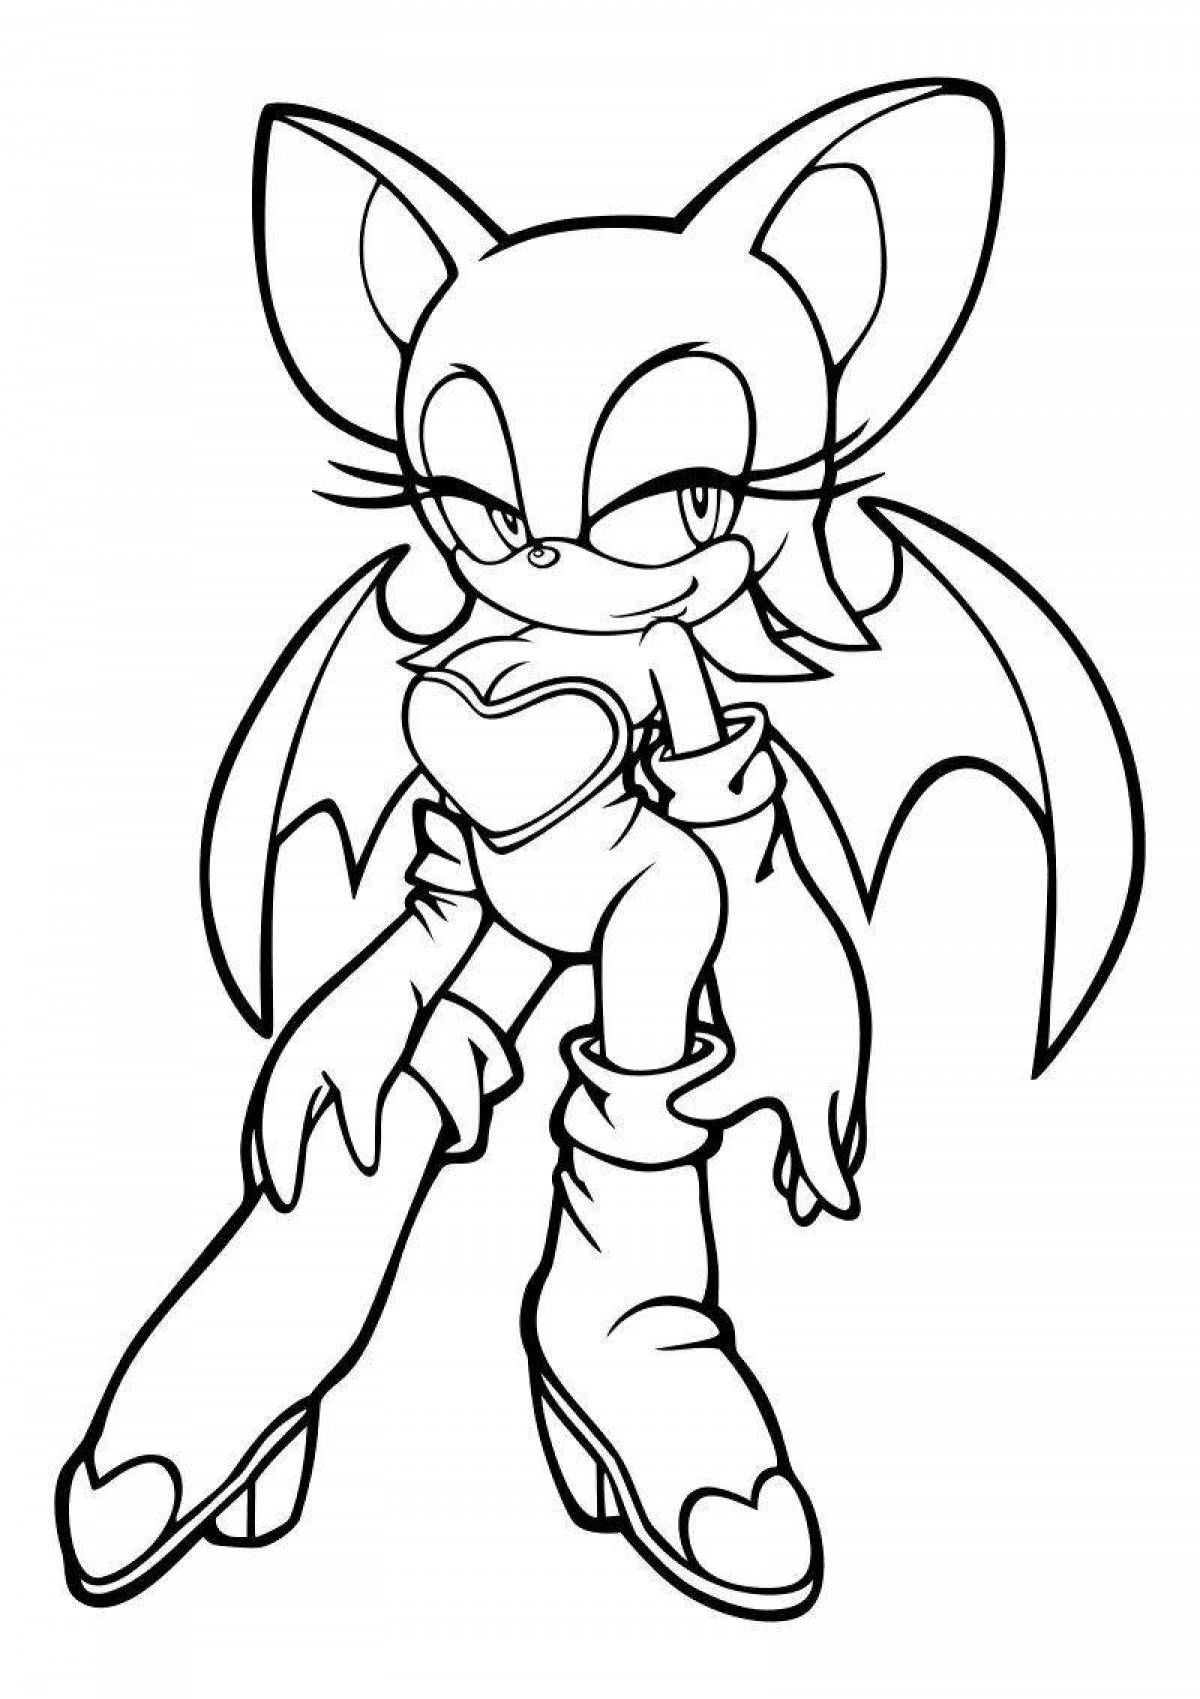 Charming sonic girl coloring book